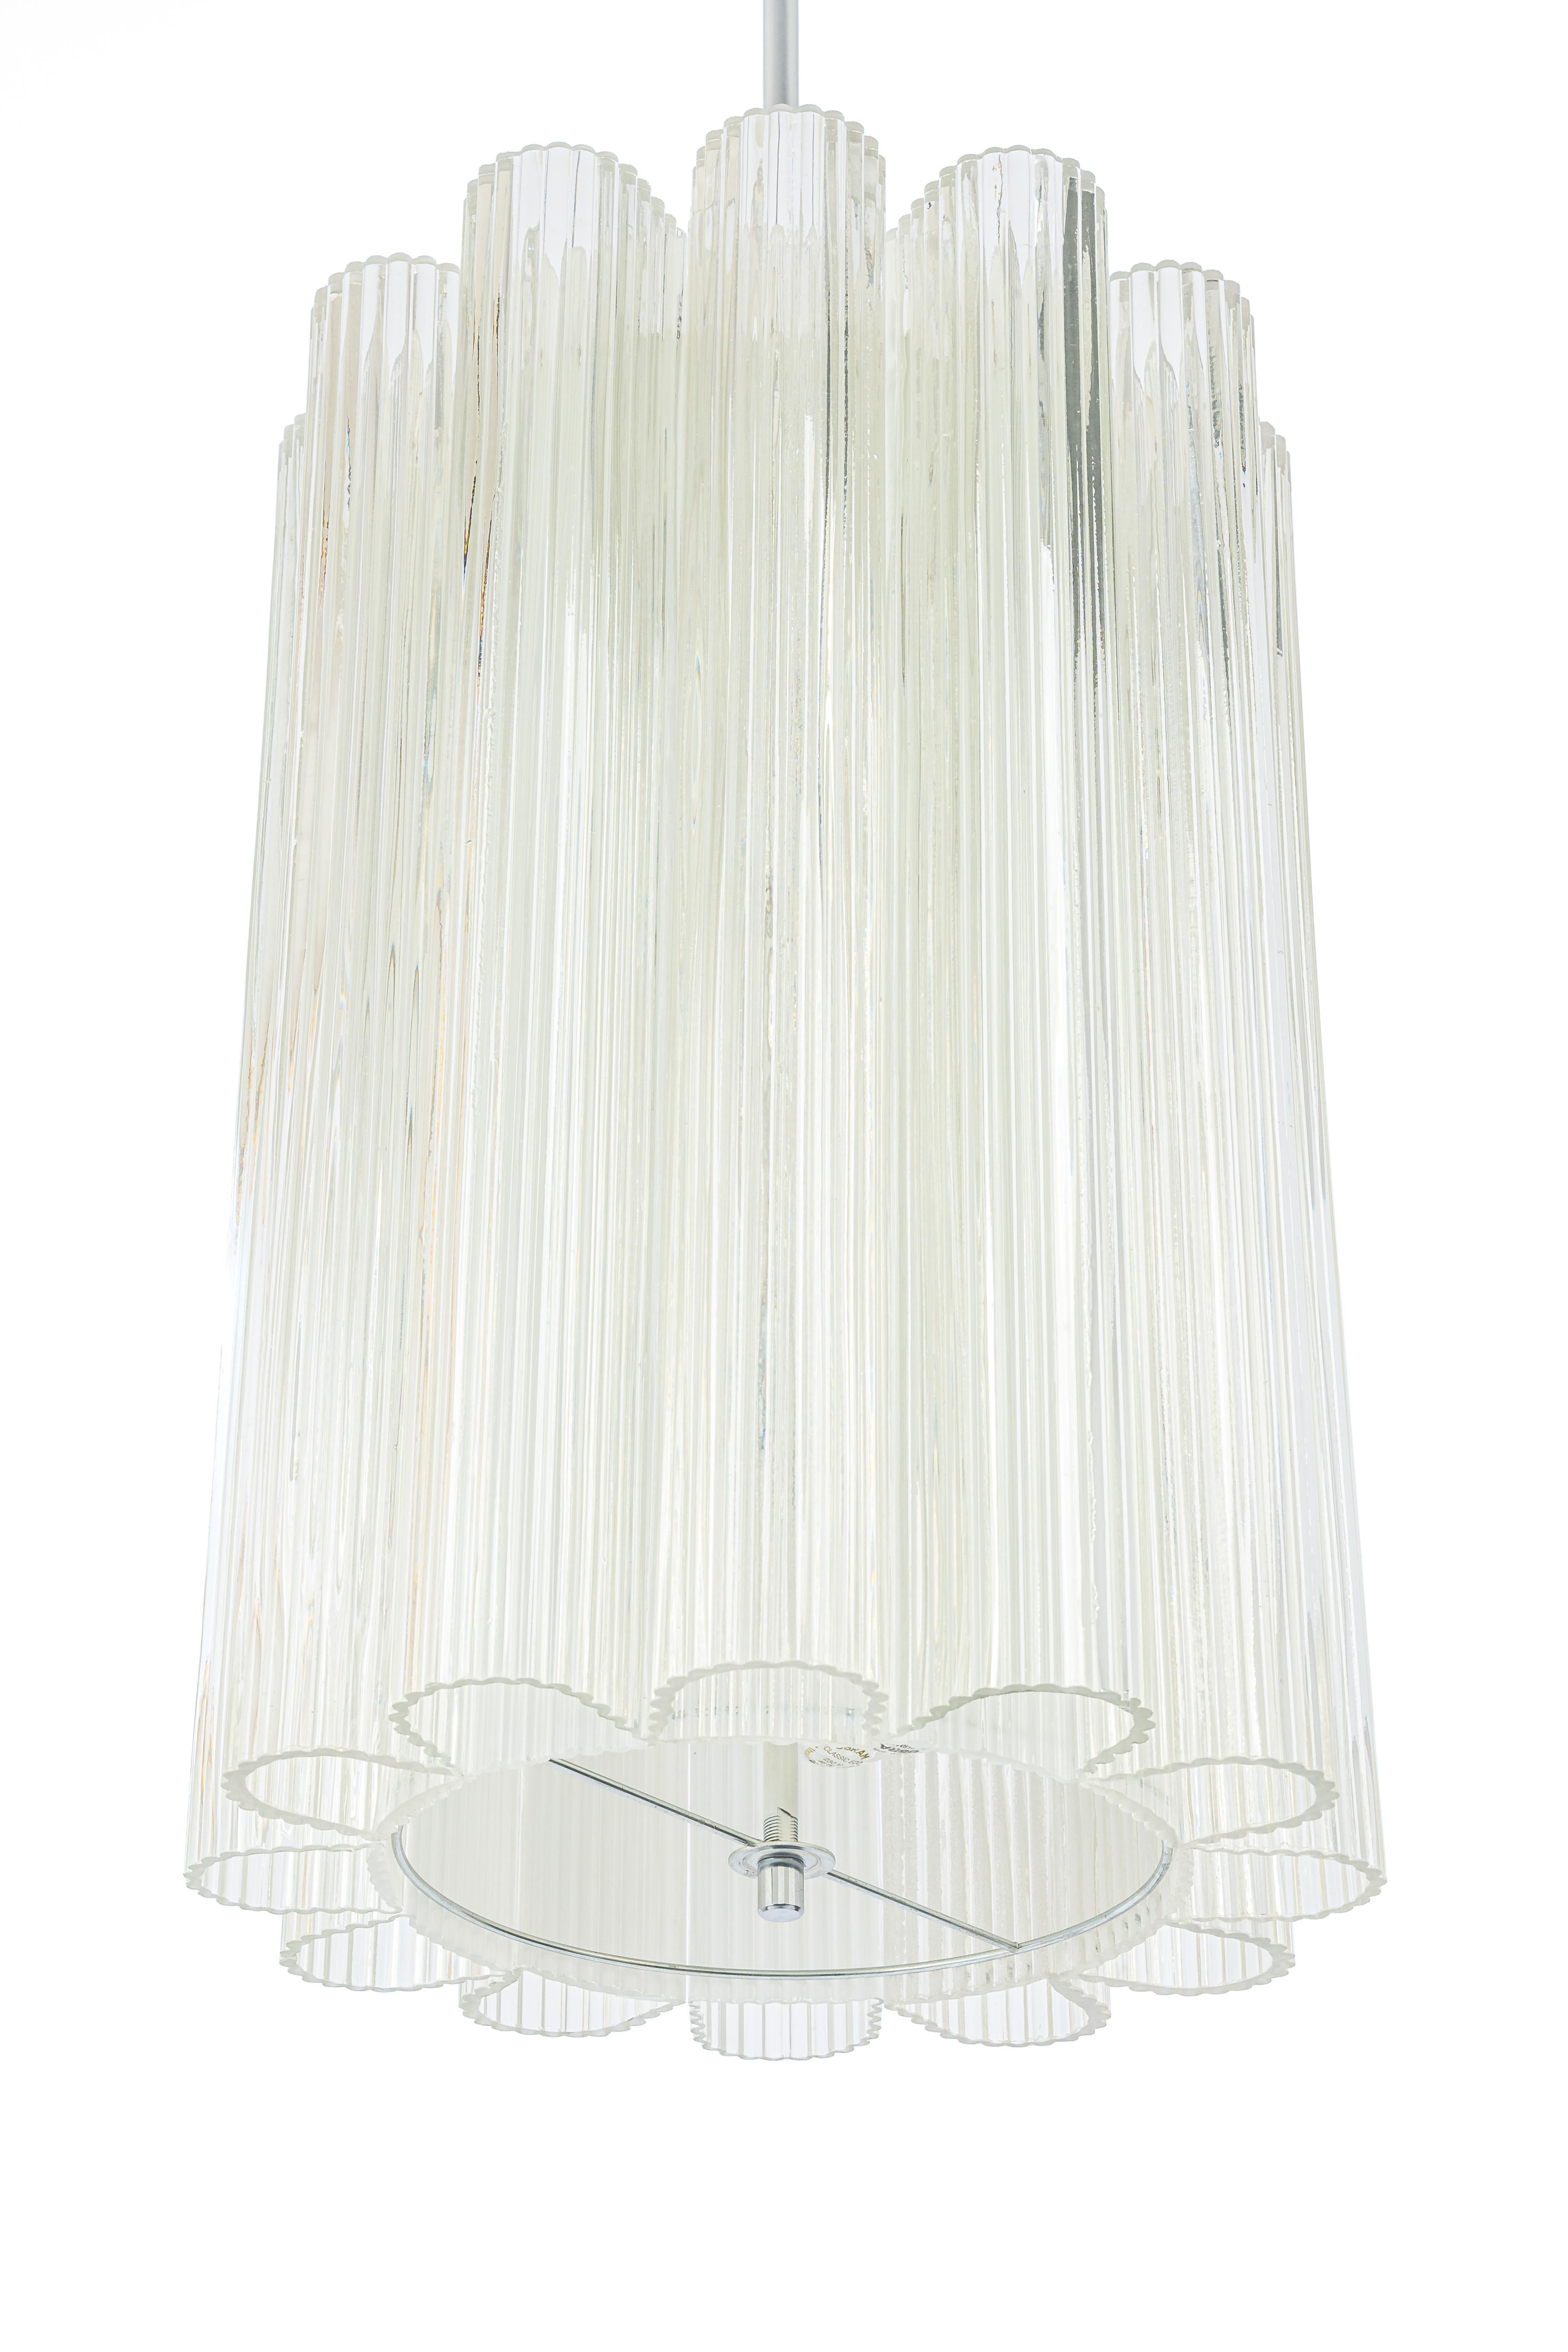 1 of 2 Cylindrical Pendant Fixture with Crystal Glass by Doria, Germany, 1960s For Sale 2